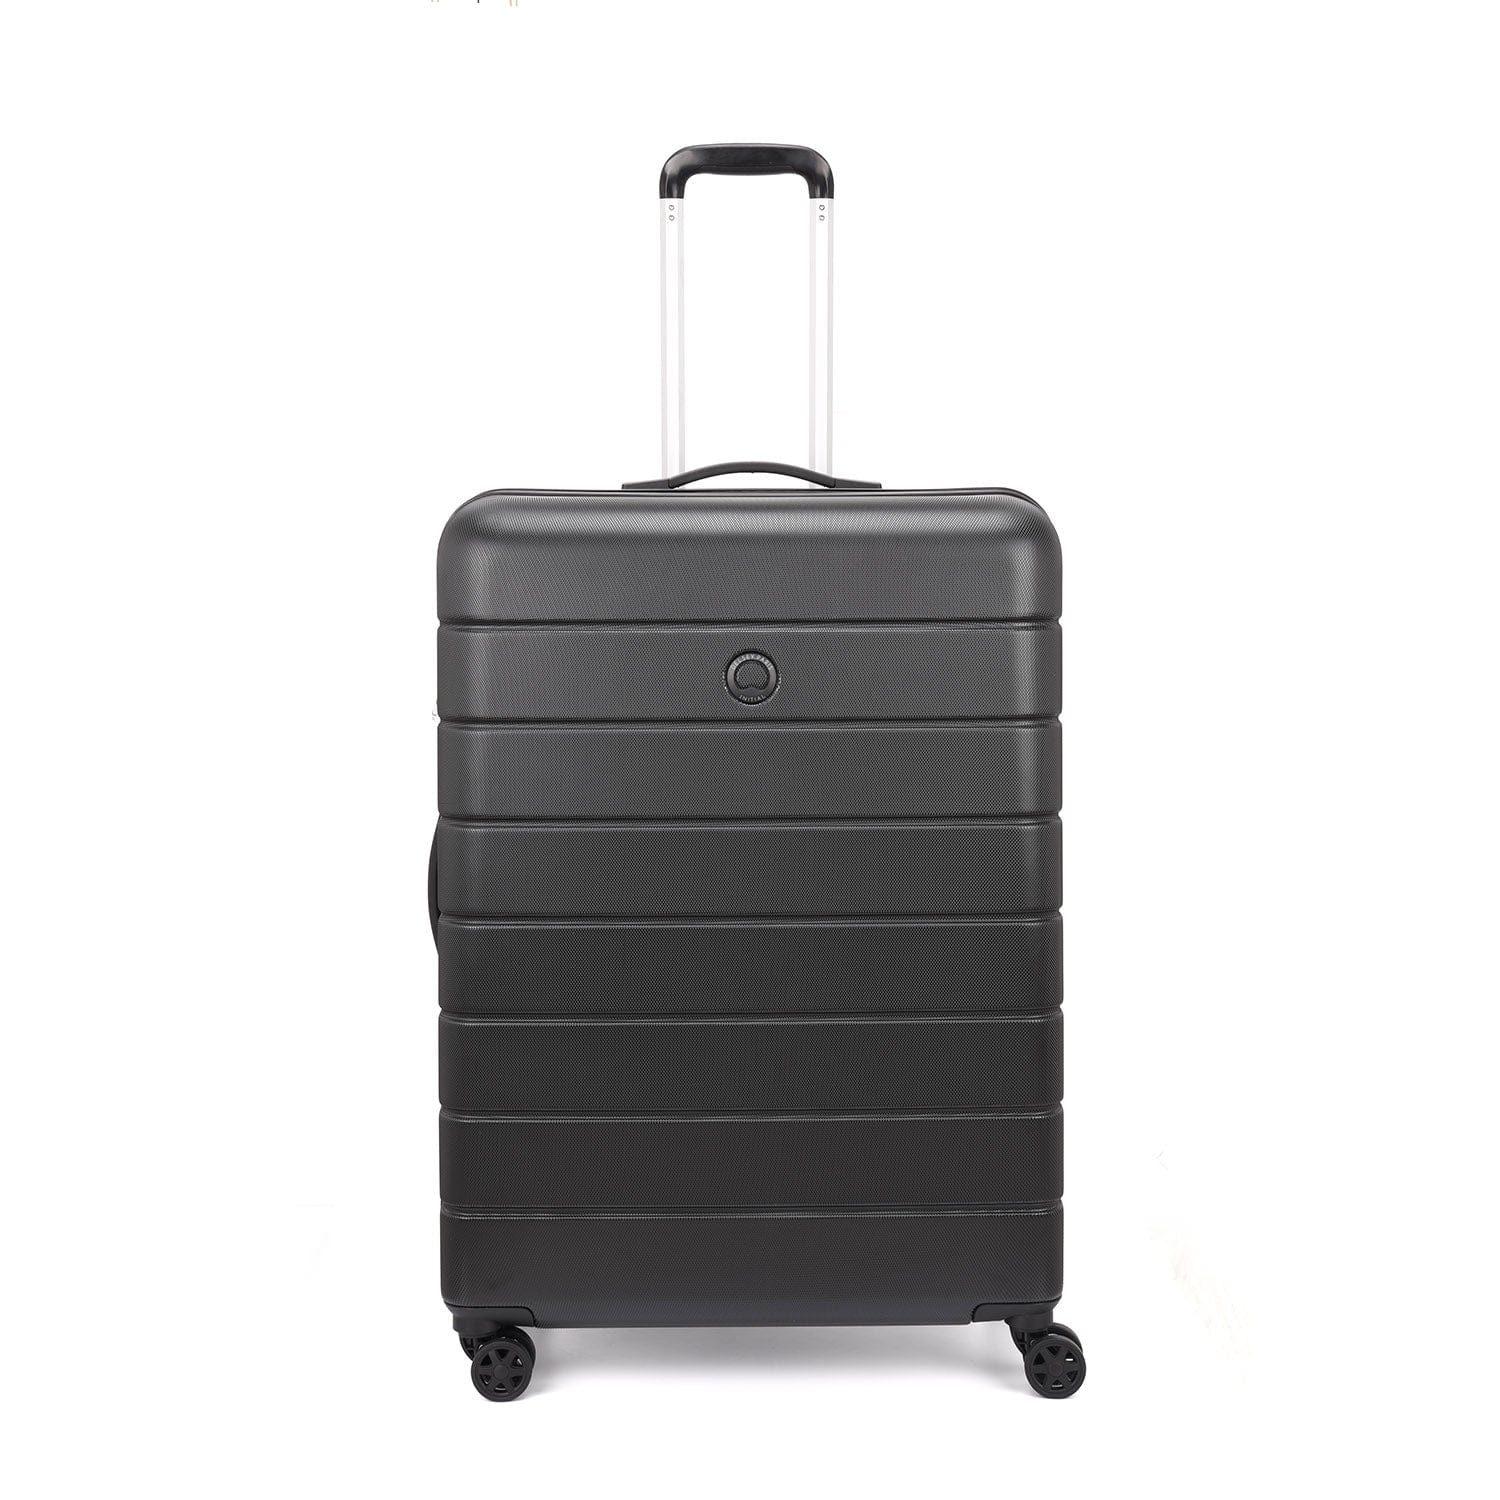 Delsey Lagos 3Piece SET 55+66+76cm Hardcase 4 Double Wheel Cabin & Check-In Luggage Trolley Black + FREE Delsey Agreable Backpack